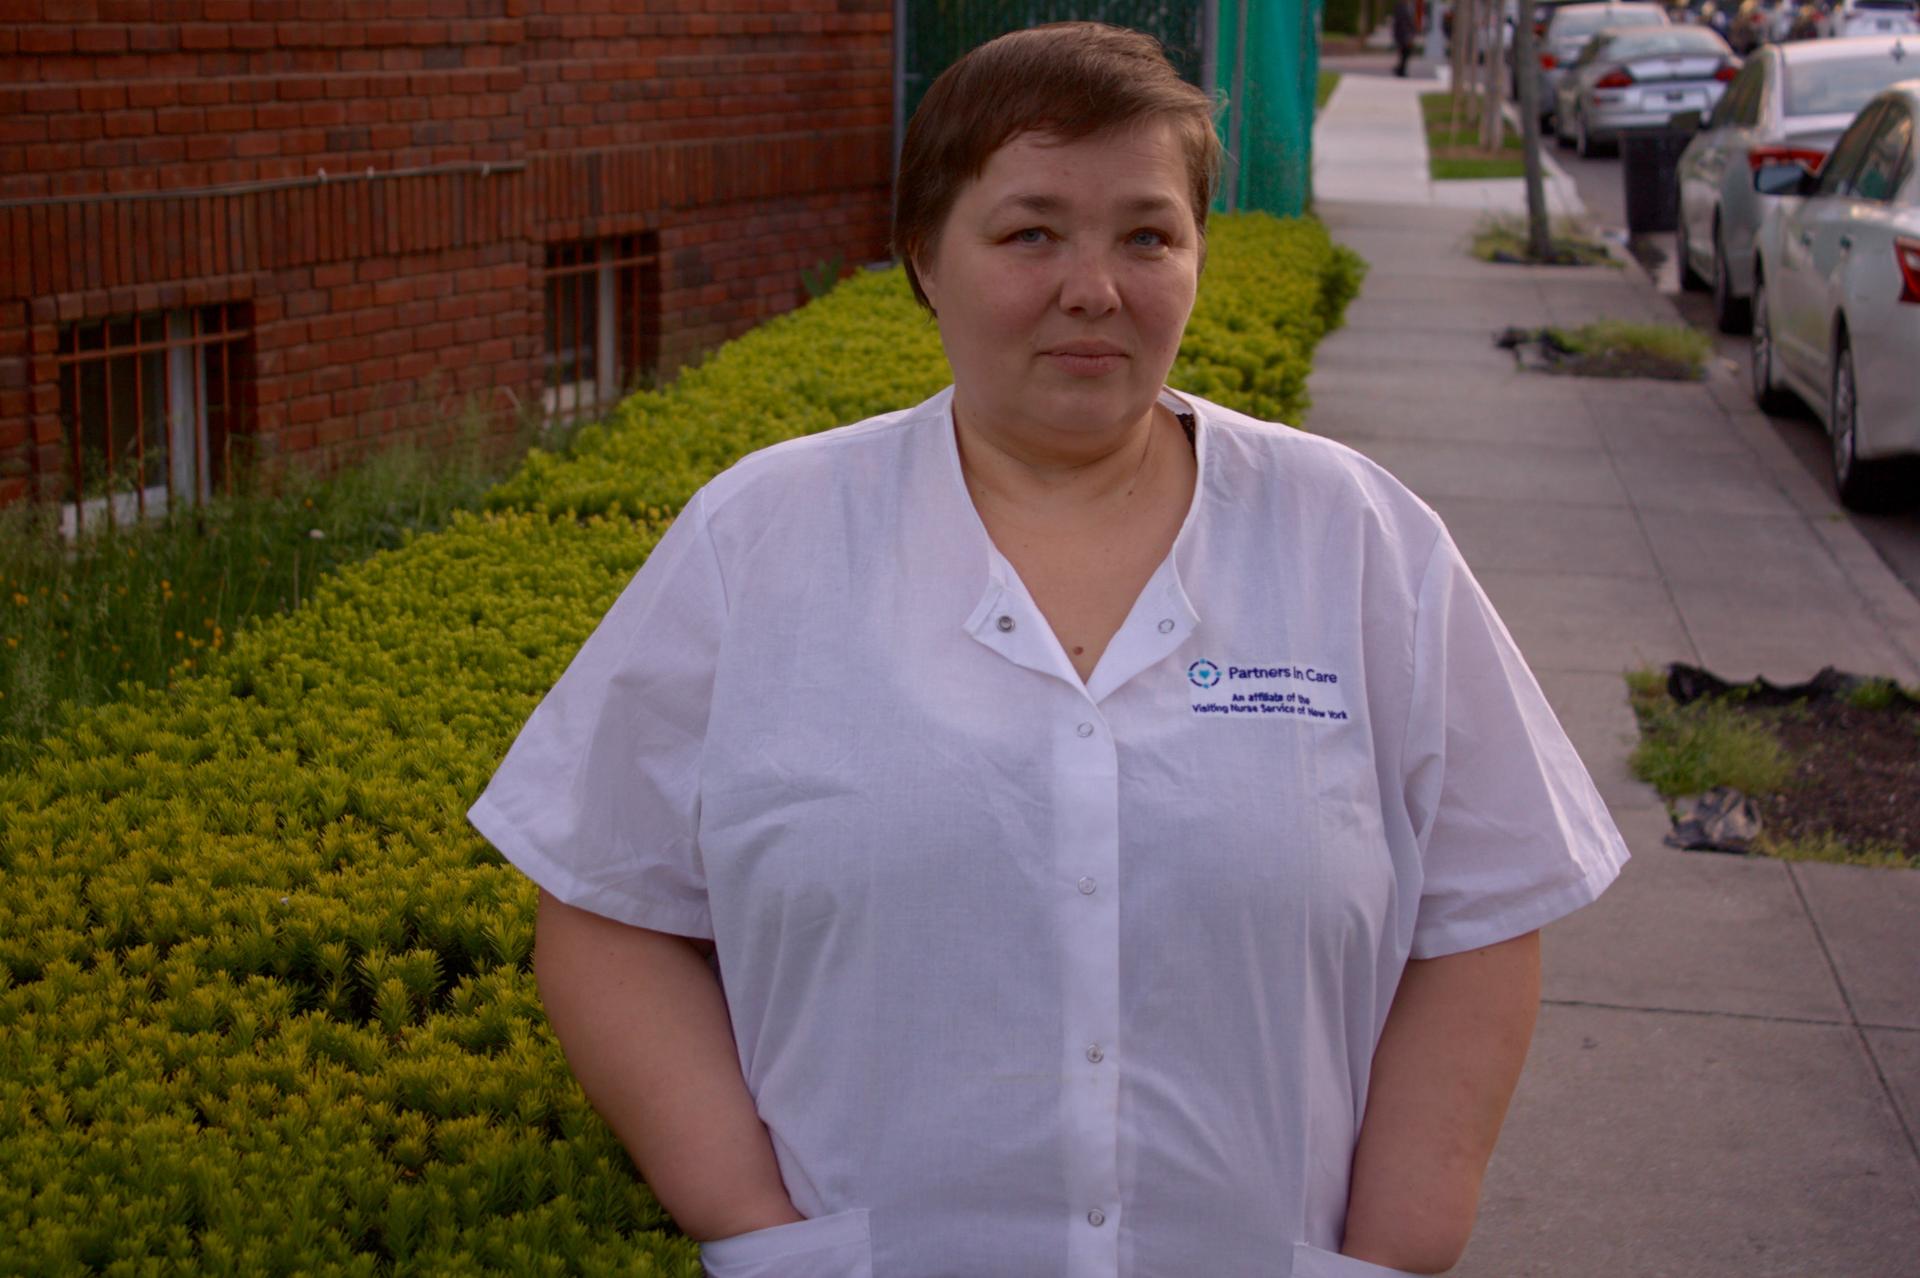 Russia-born Lena Antipov now works as a home health aide in New York.